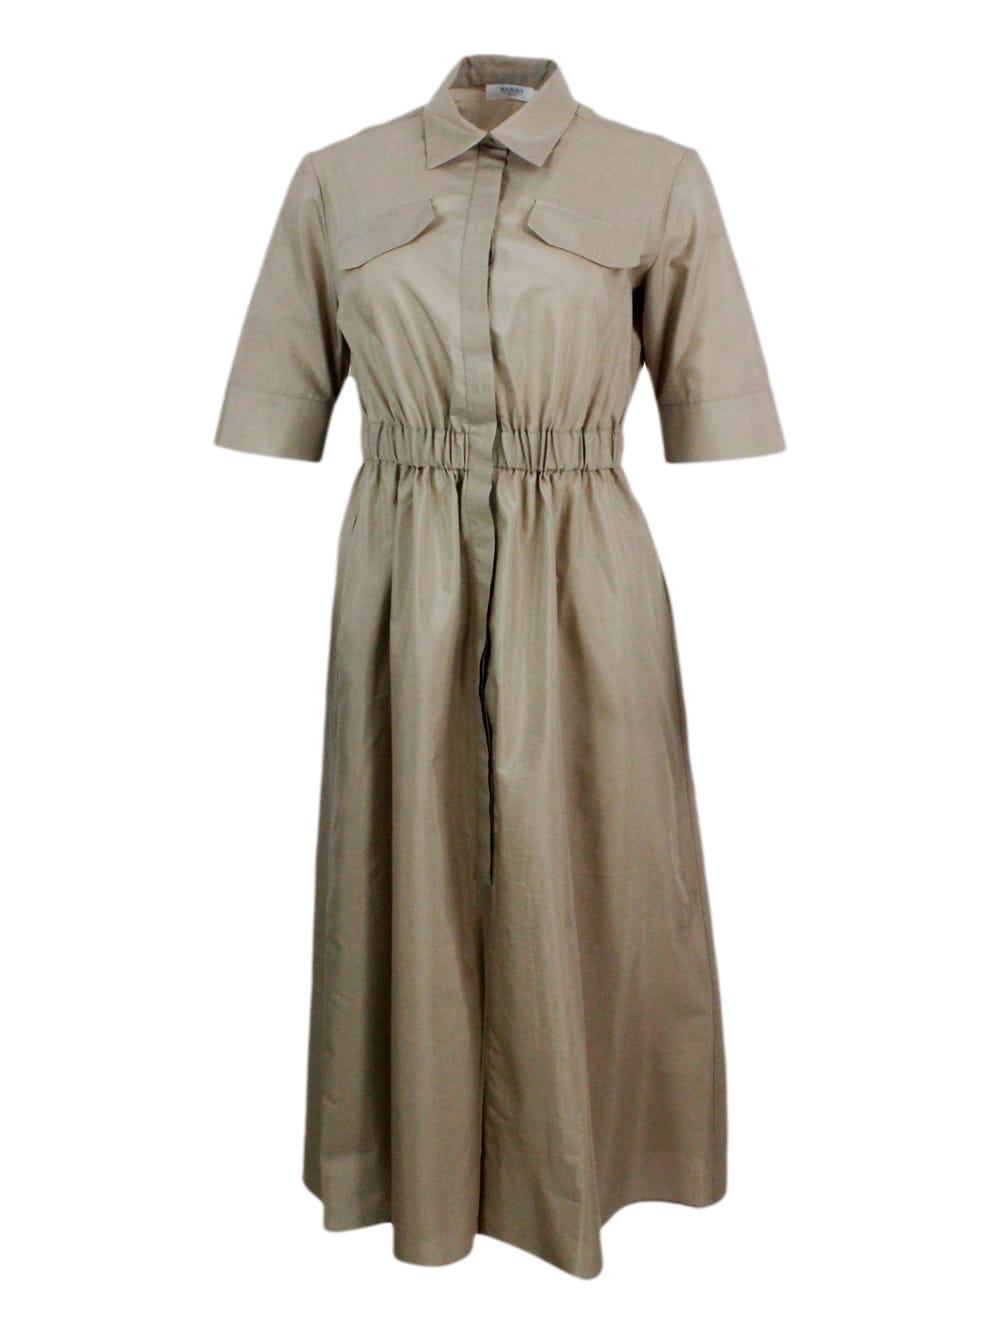 Shop Barba Napoli Long Dress Made Of Cotton With Short Sleeves, With Elastic Waist And Button Closure. Welt Pockets In Beige